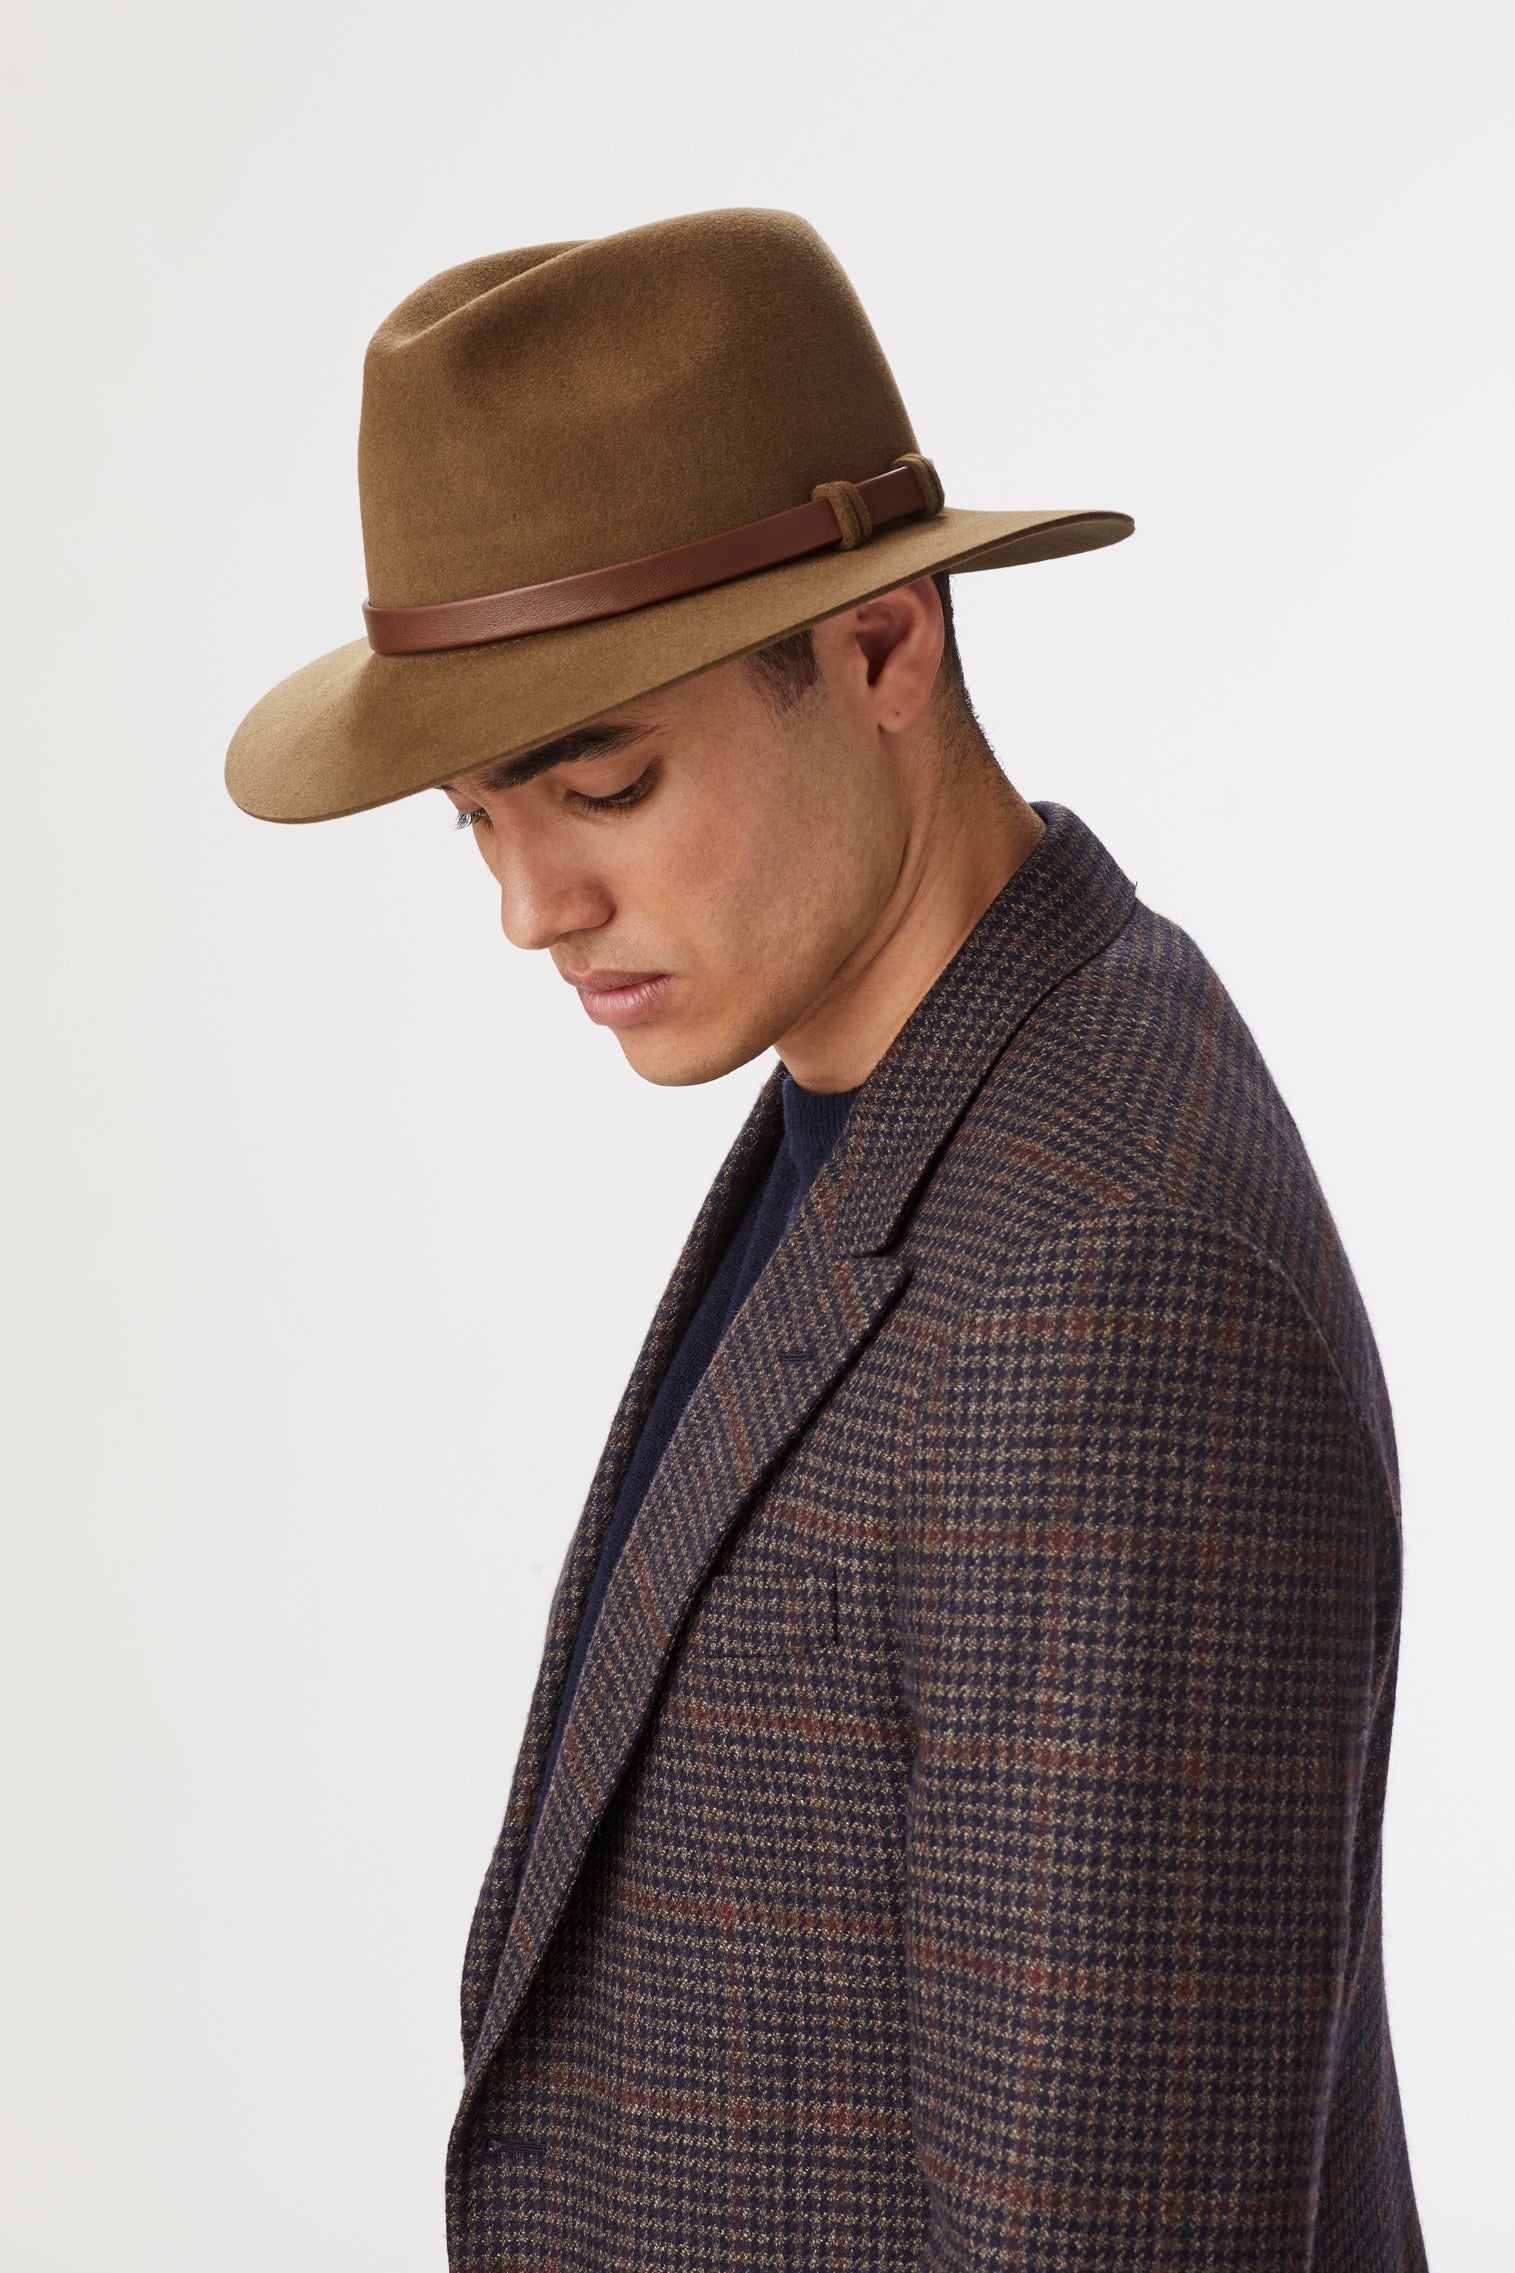 Chepstow Trilby - Hats for Heart-shaped Face Shapes - Lock & Co. Hatters London UK